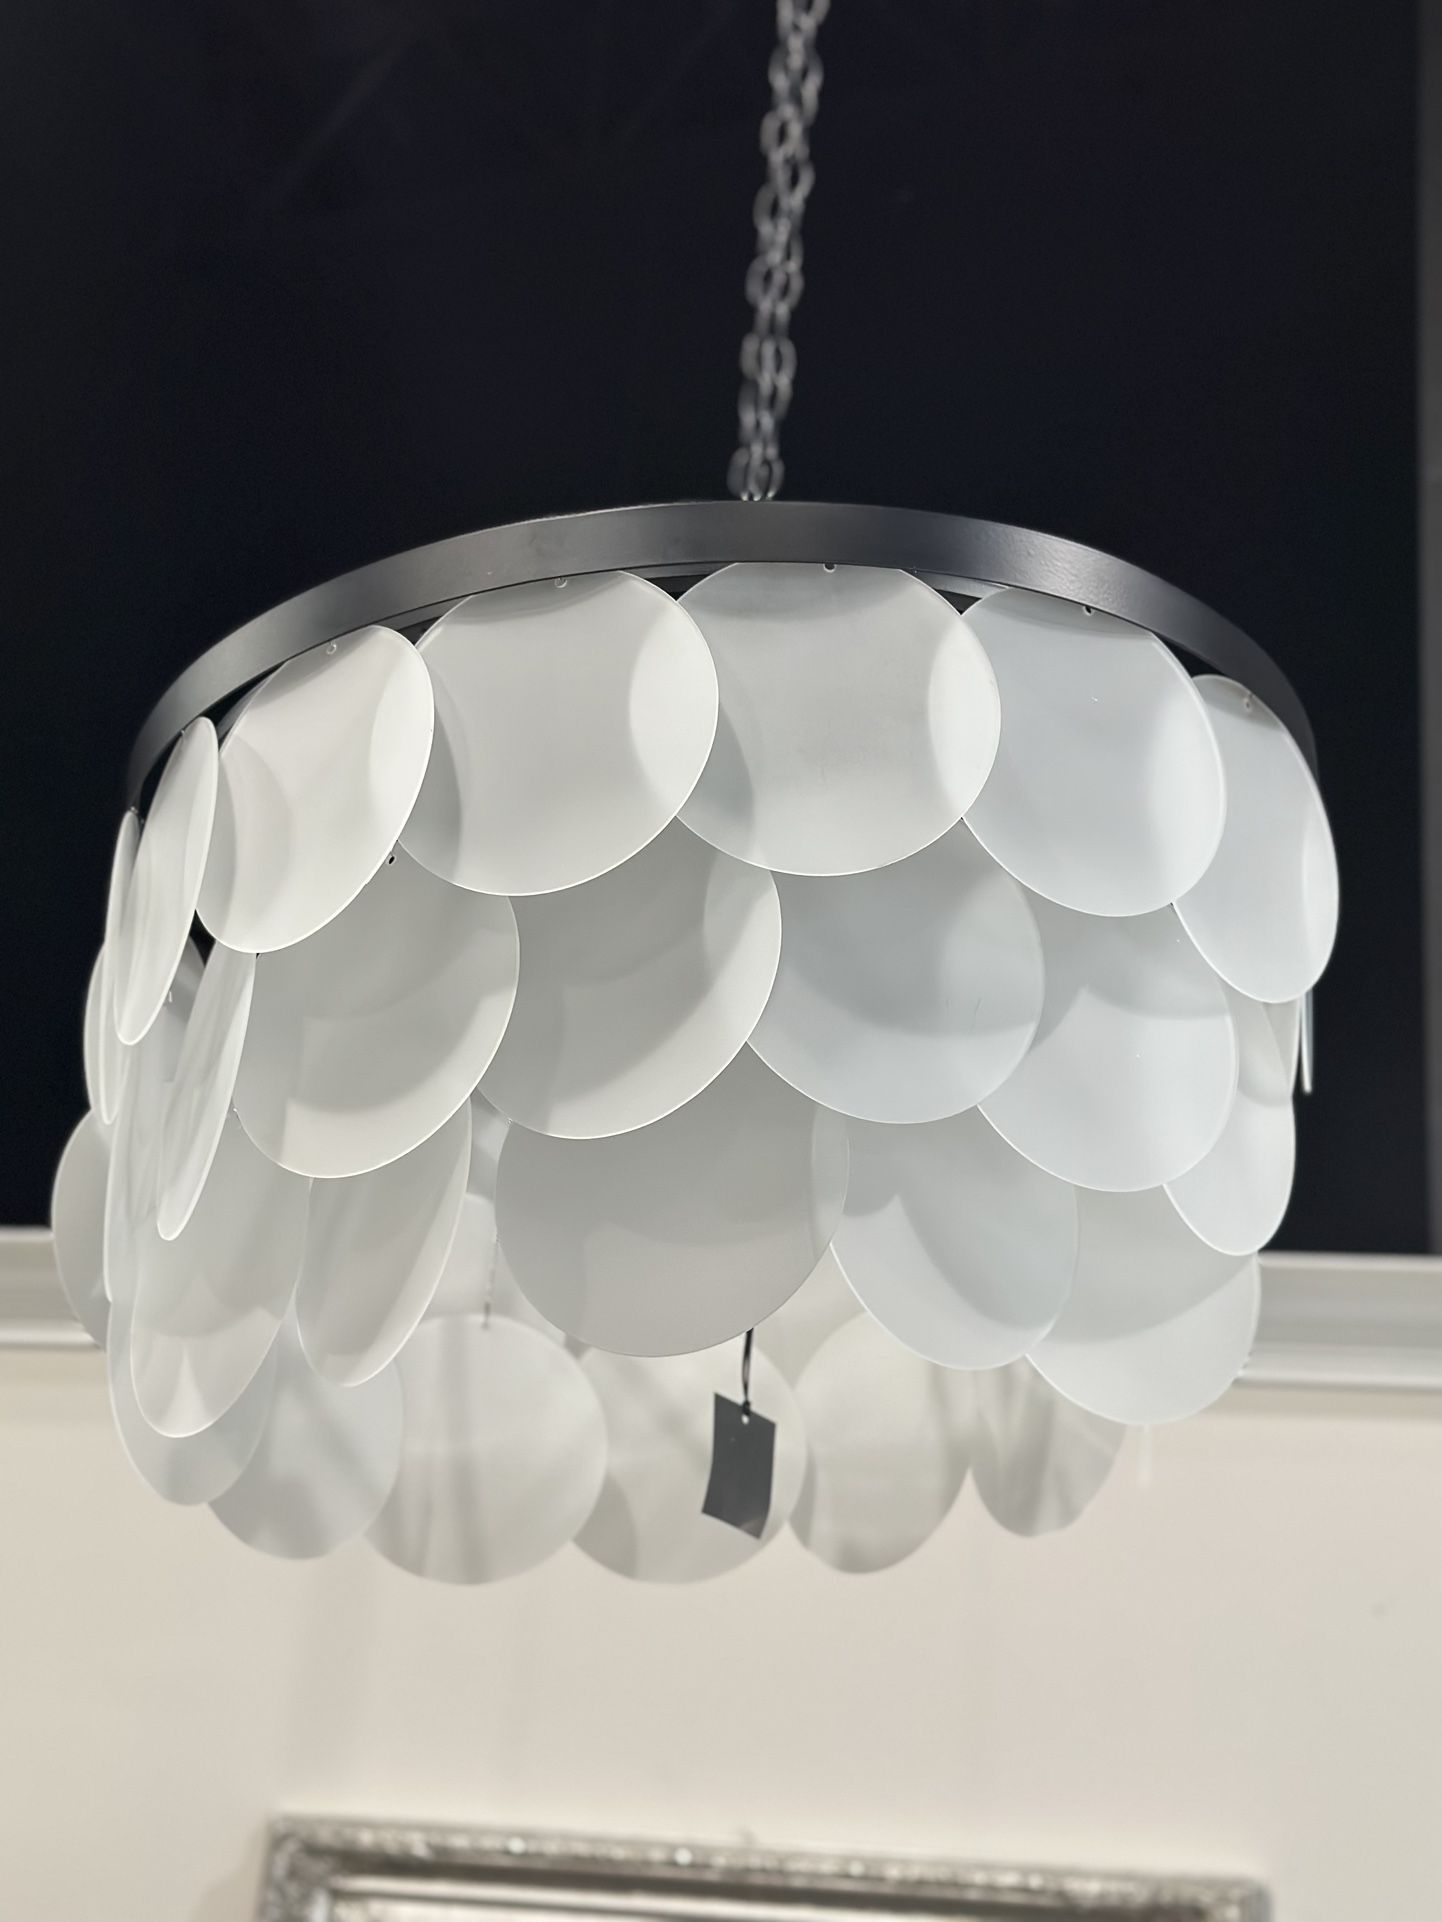 Ainsley 8 - Light Dimmable Tiered Chandelier. 19.625'' H X 30'' W X 30'' D MSRP $1163. Our price $429 + sales tax  